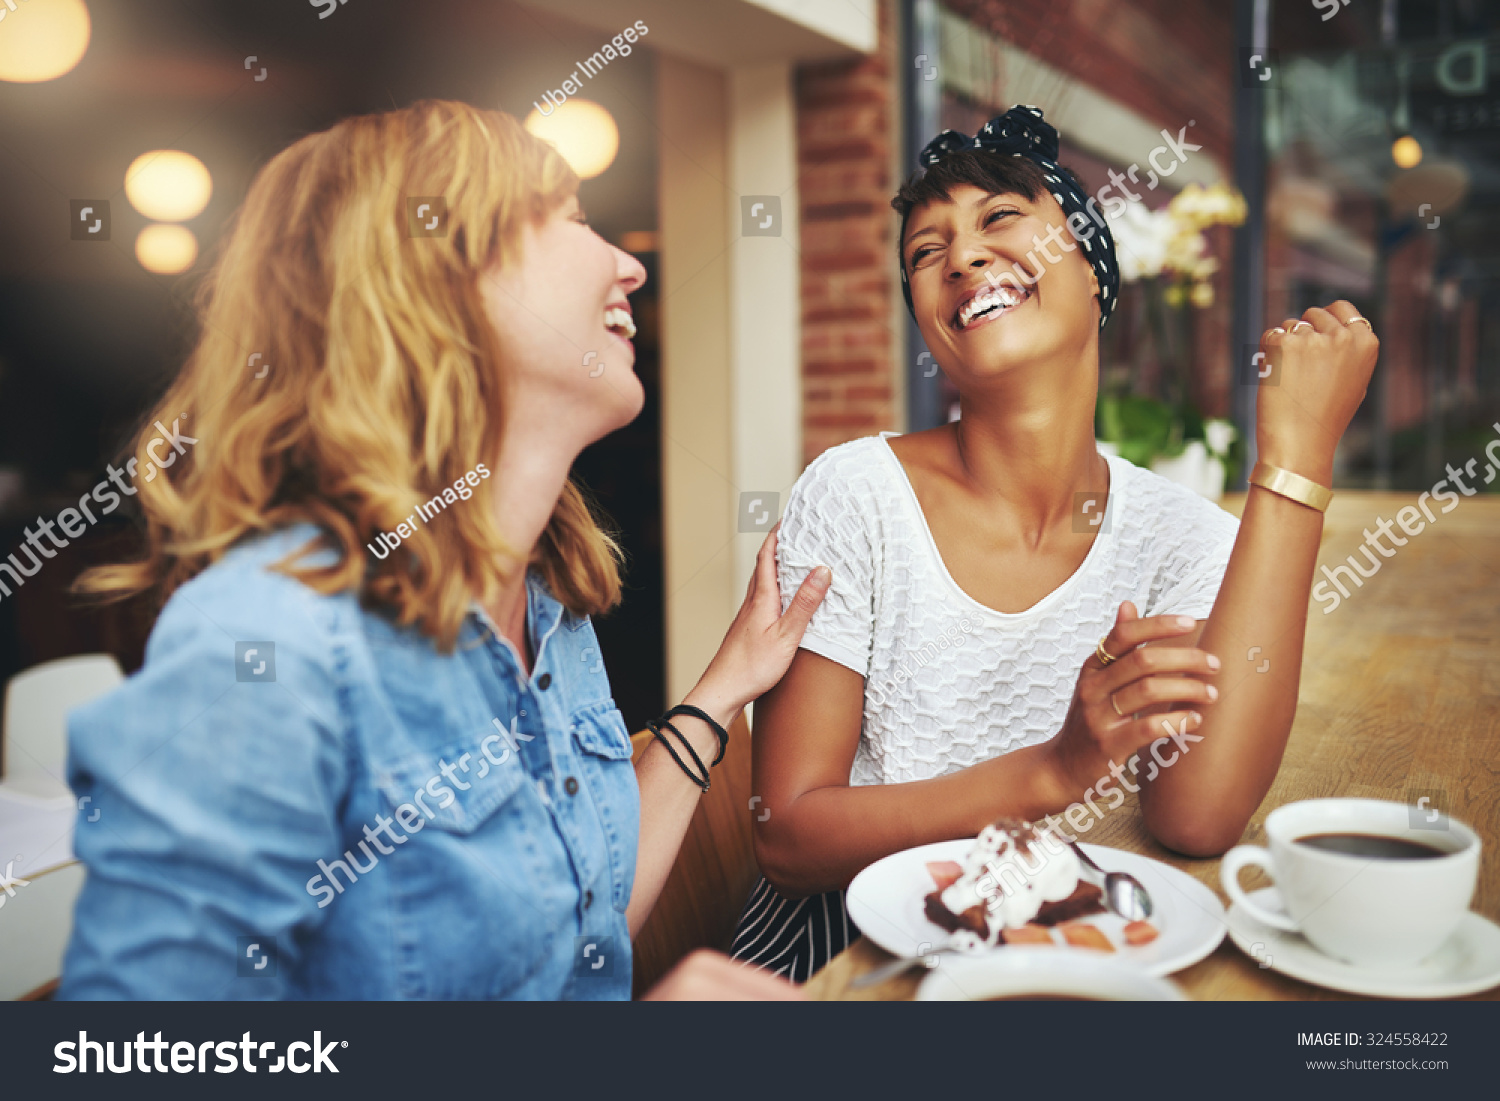 Two multiethnic young female friends enjoying coffee together in a restaurant laughing and joking while touching to display affection #324558422